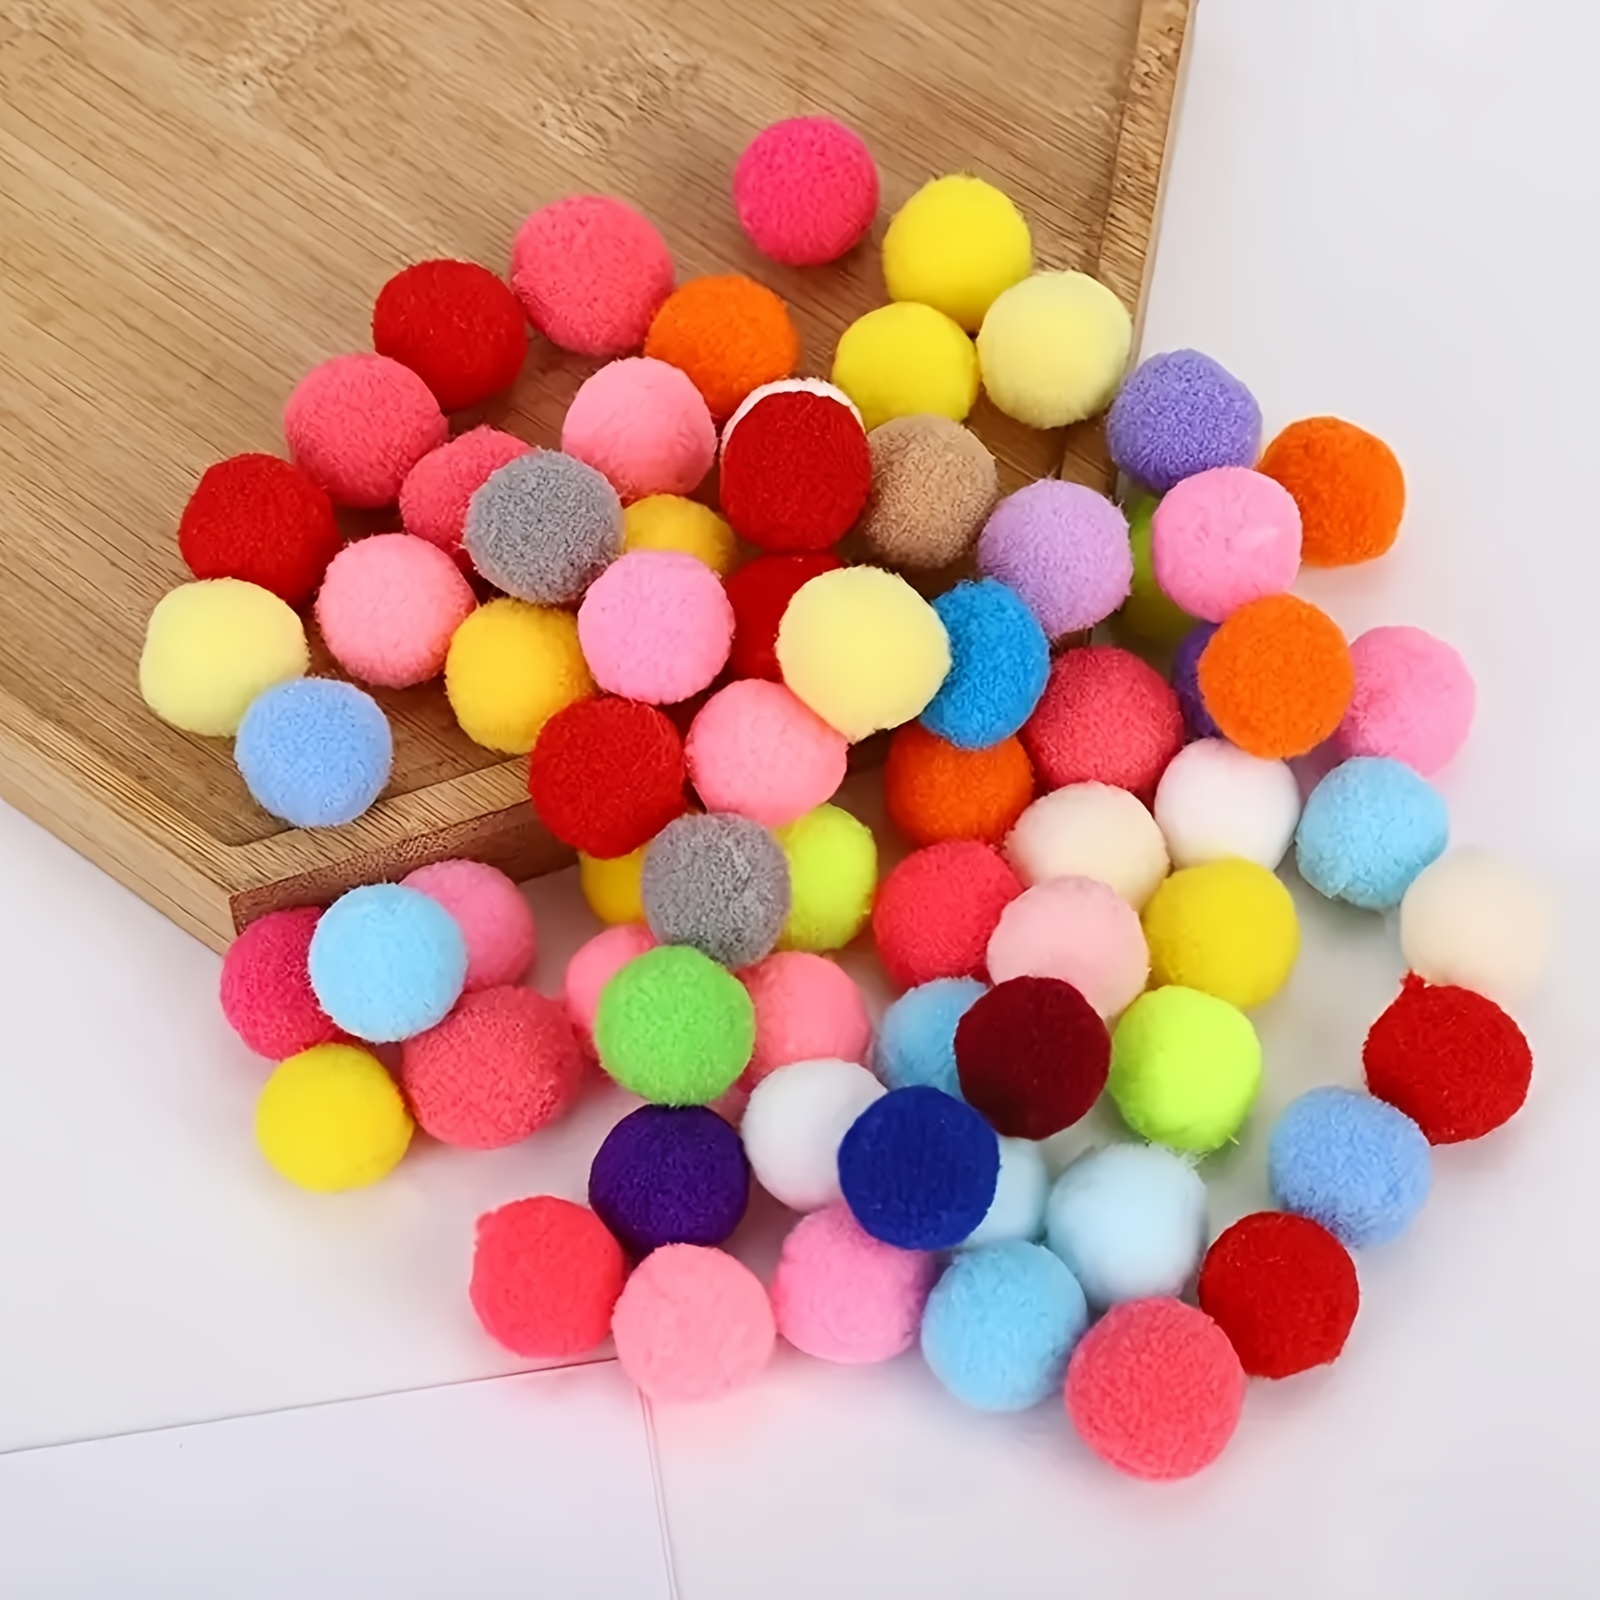 120pcs Assorted Sizes & Colors Craft Pom Poms Balls for Hobby Supplies and DIY Creative Crafts Party Decorations (06)